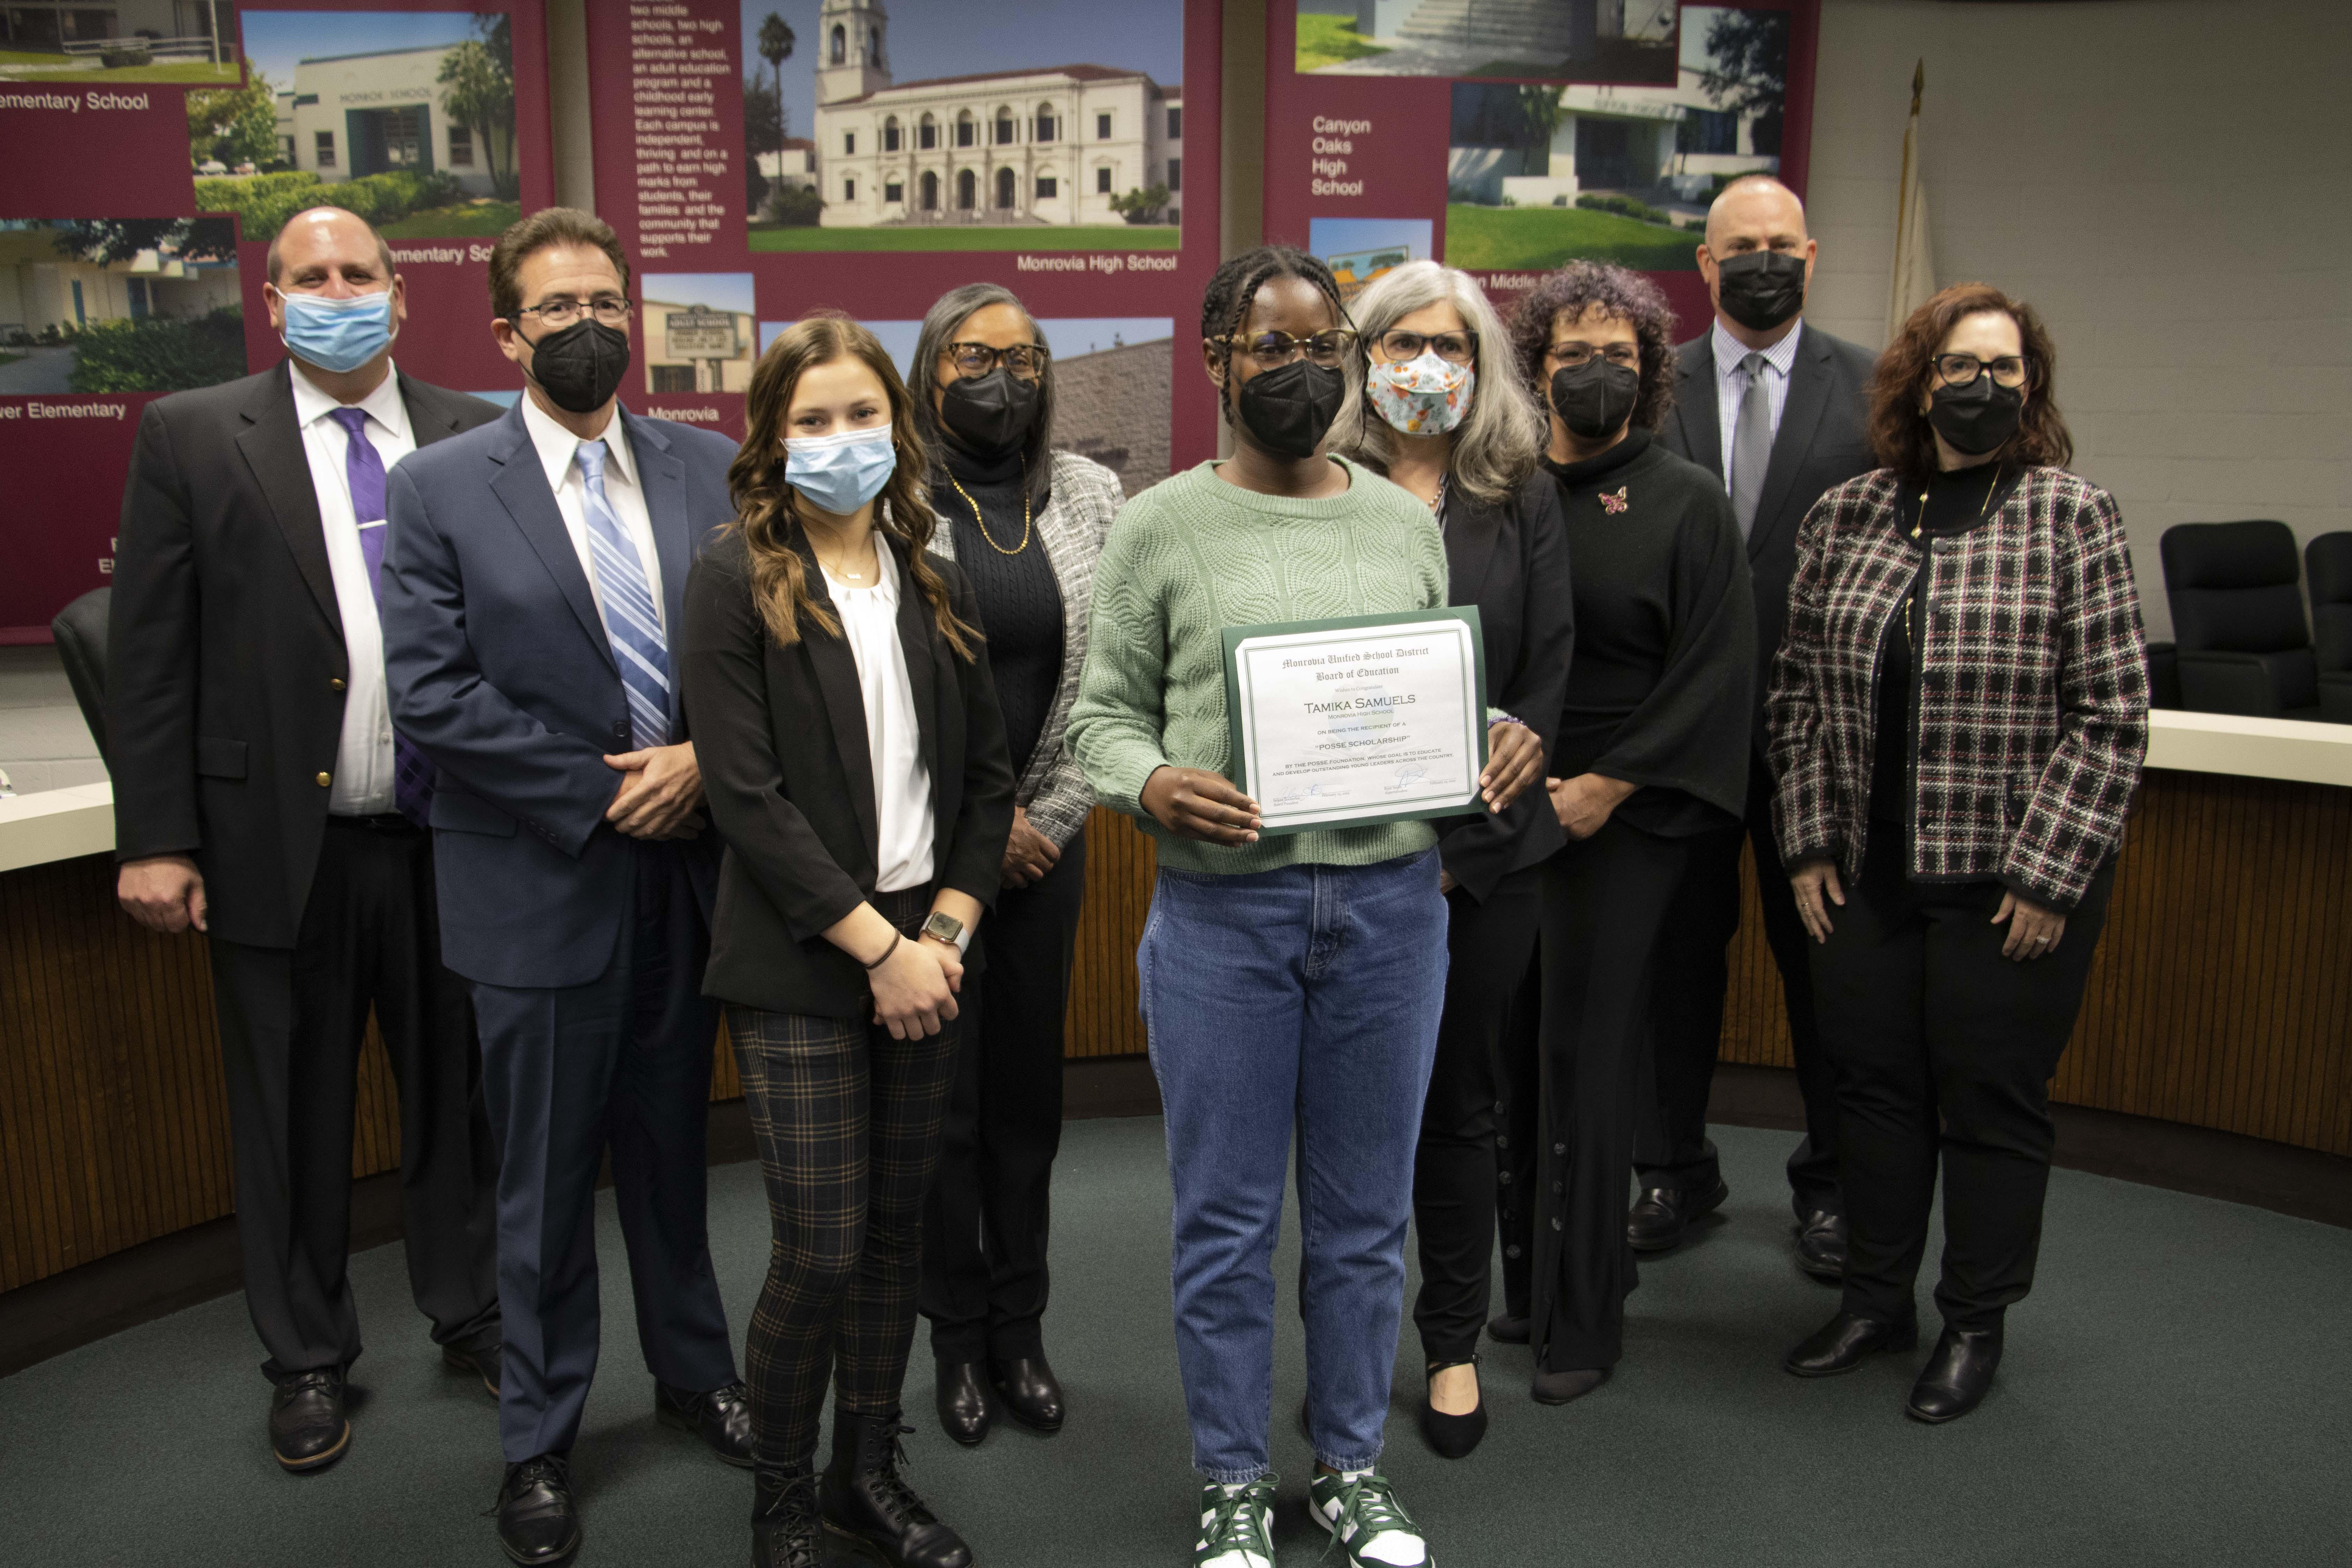 Tamika Samuels is recognized by the Board of Education for being awarded the Posse Scholarship.